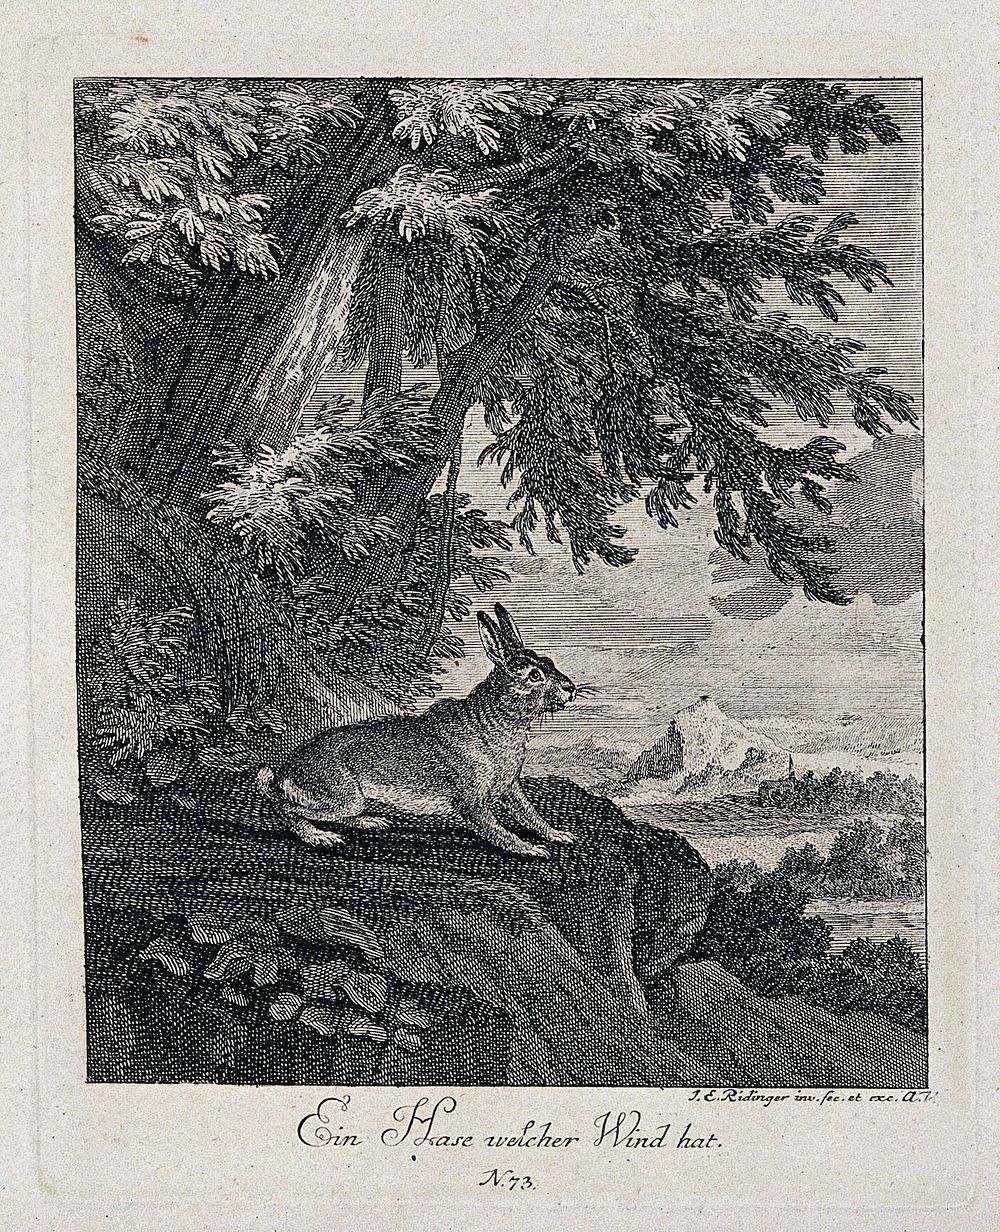 A hare standing on a rock outside a forest overlooking the countryside. Etching by J. E. Ridinger.